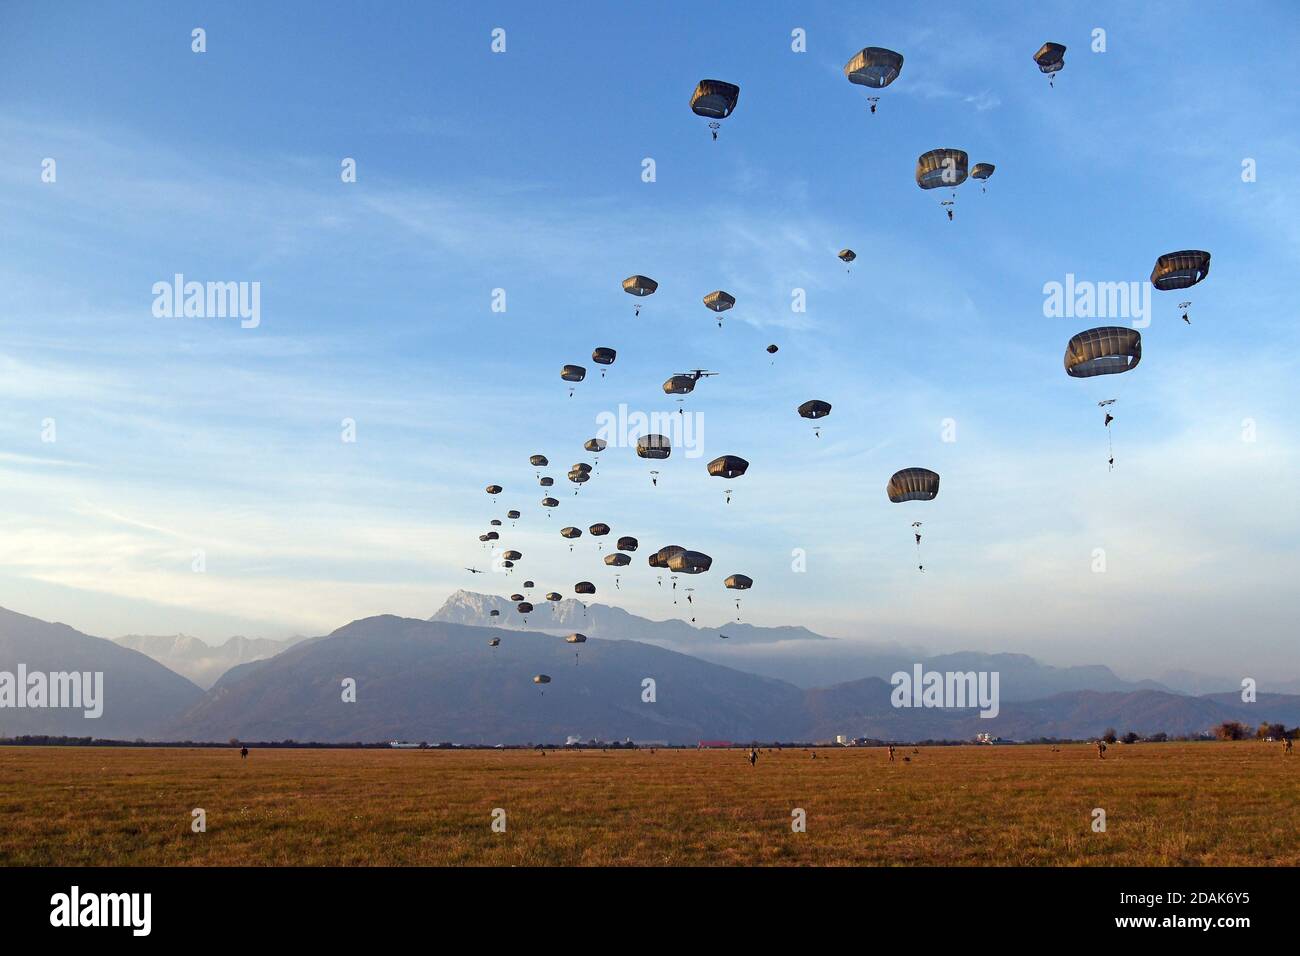 Pordenone, Italy. 12th Nov, 2020. U.S. Army Paratroopers with the 173rd Airborne Brigade, and Paratroopers with the Italian Army 4th Alpini Regiment, conduct airborne operation at dawn November 12, 2020 in Pordenone, Italy. Credit: Davide Dalla Massara/U.S. Army Photo/Alamy Live News Stock Photo